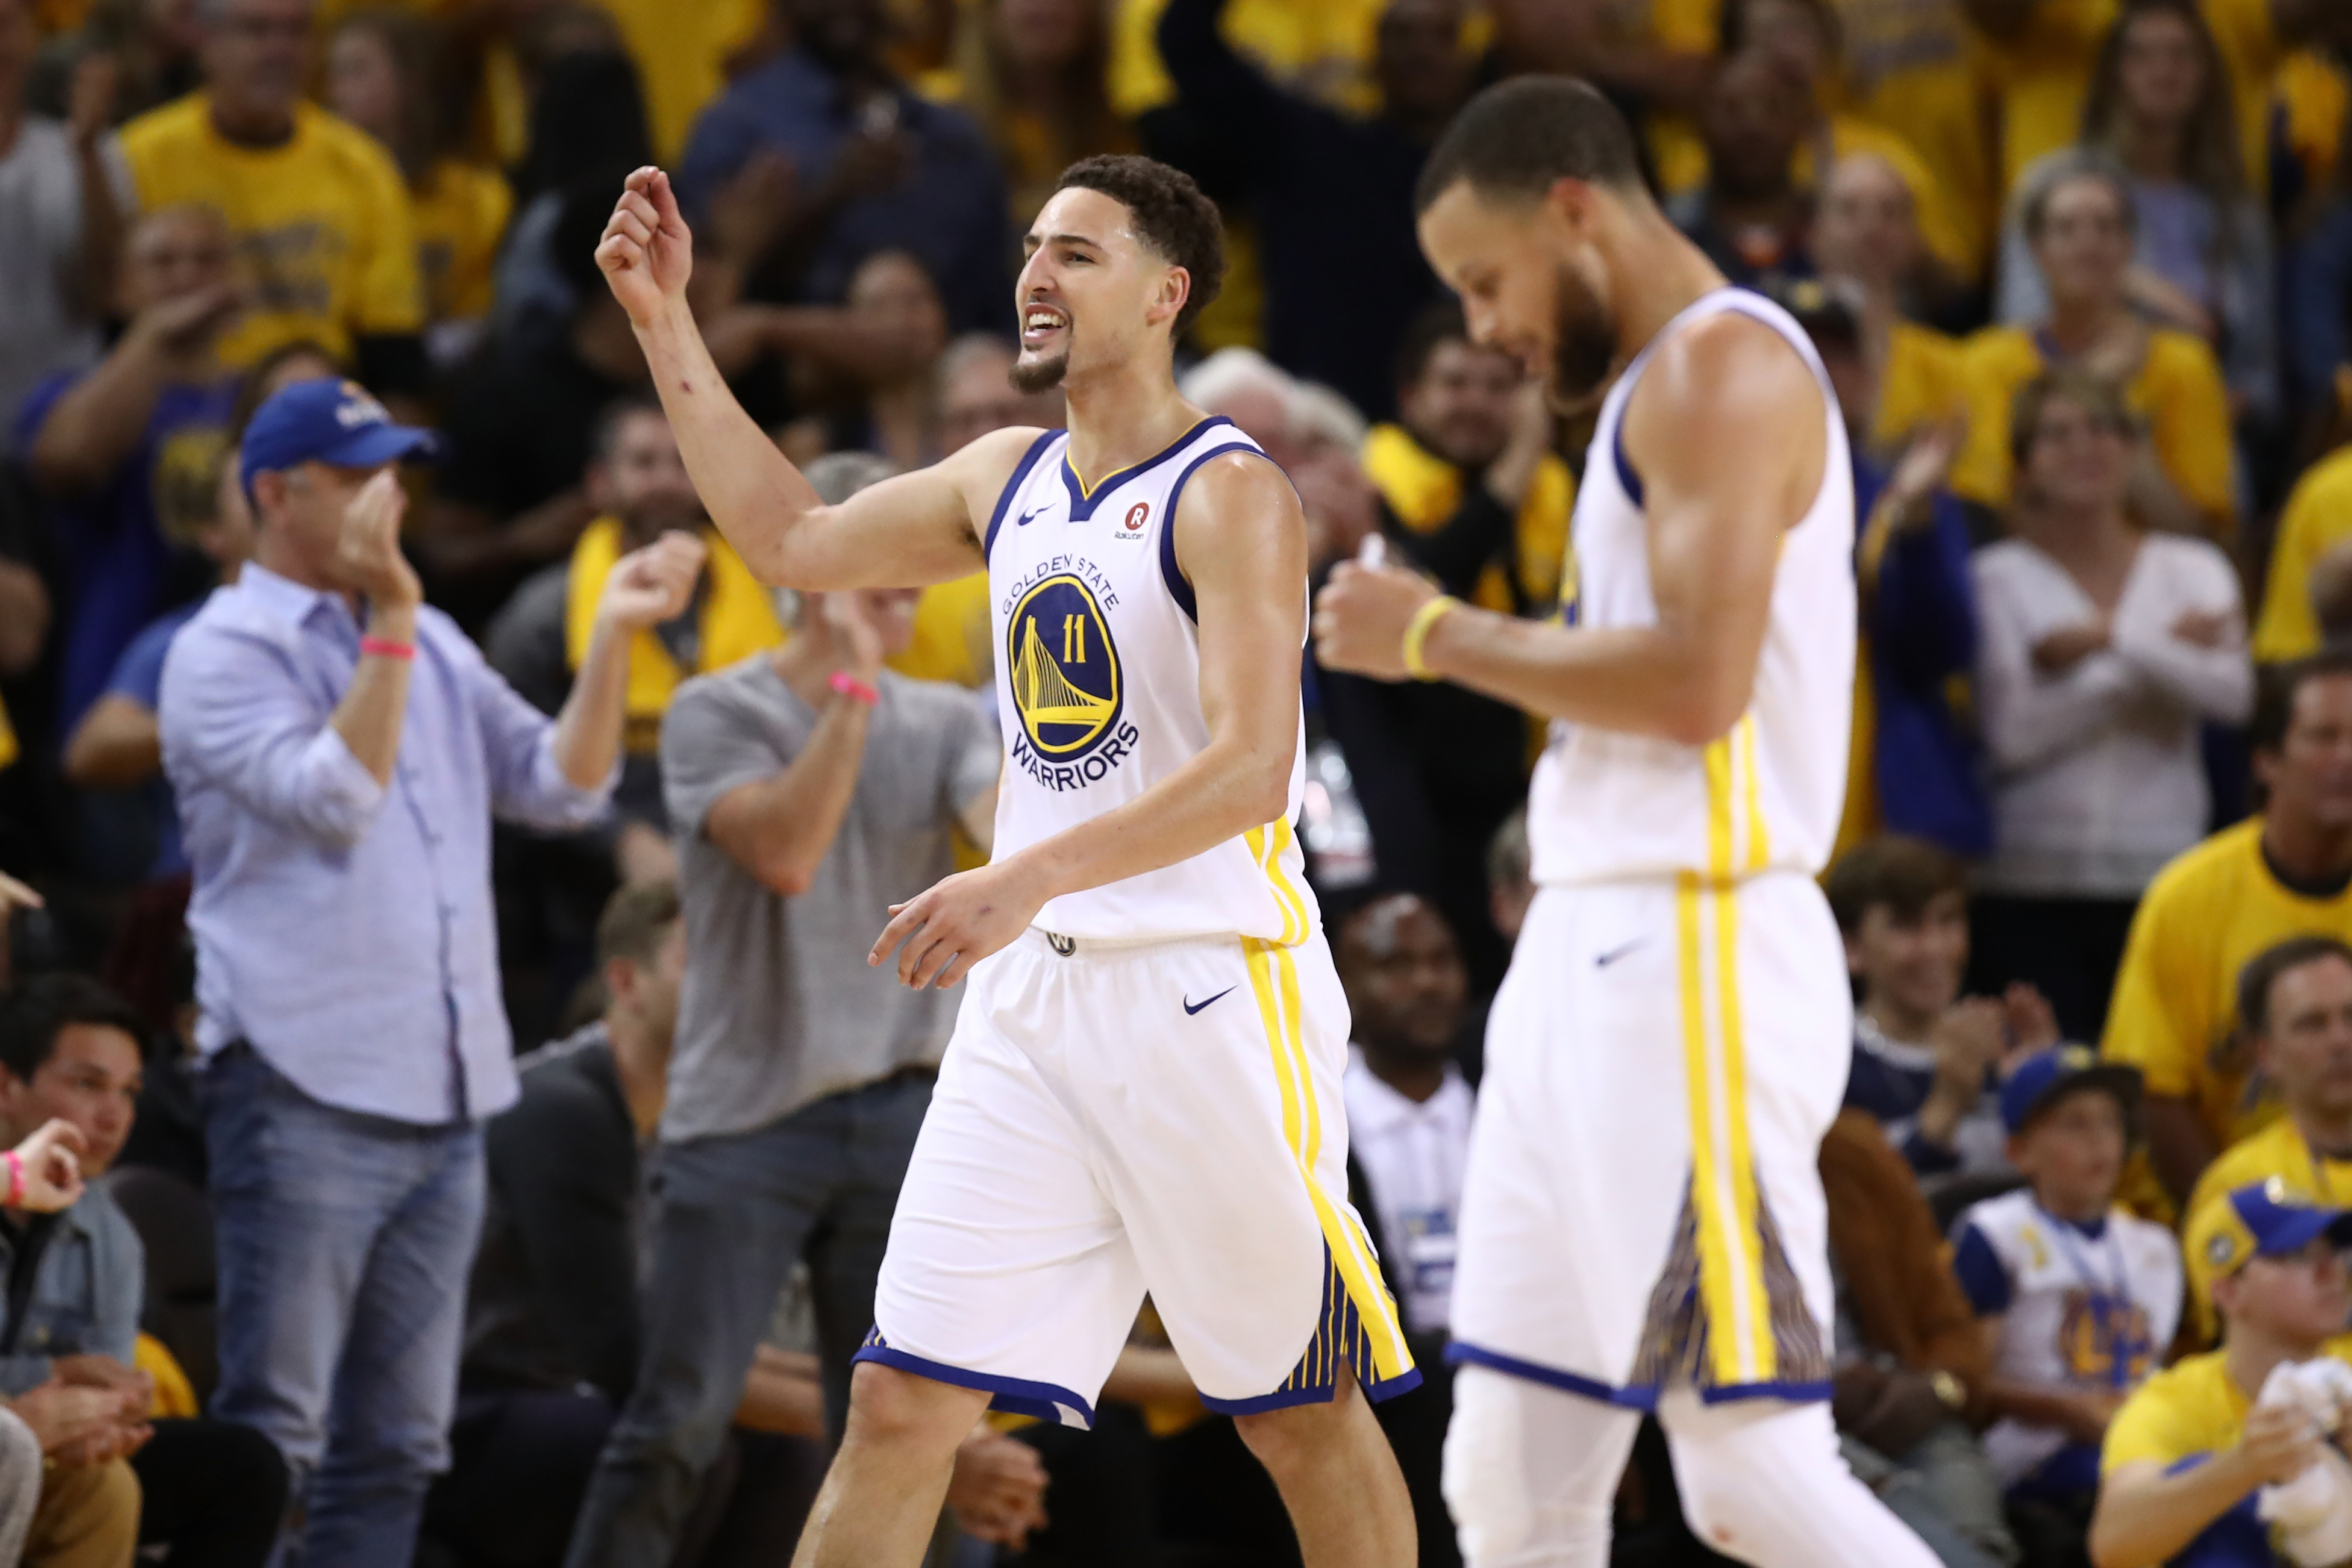 Inside Klay Thompson's and the Warriors' record-breaking night